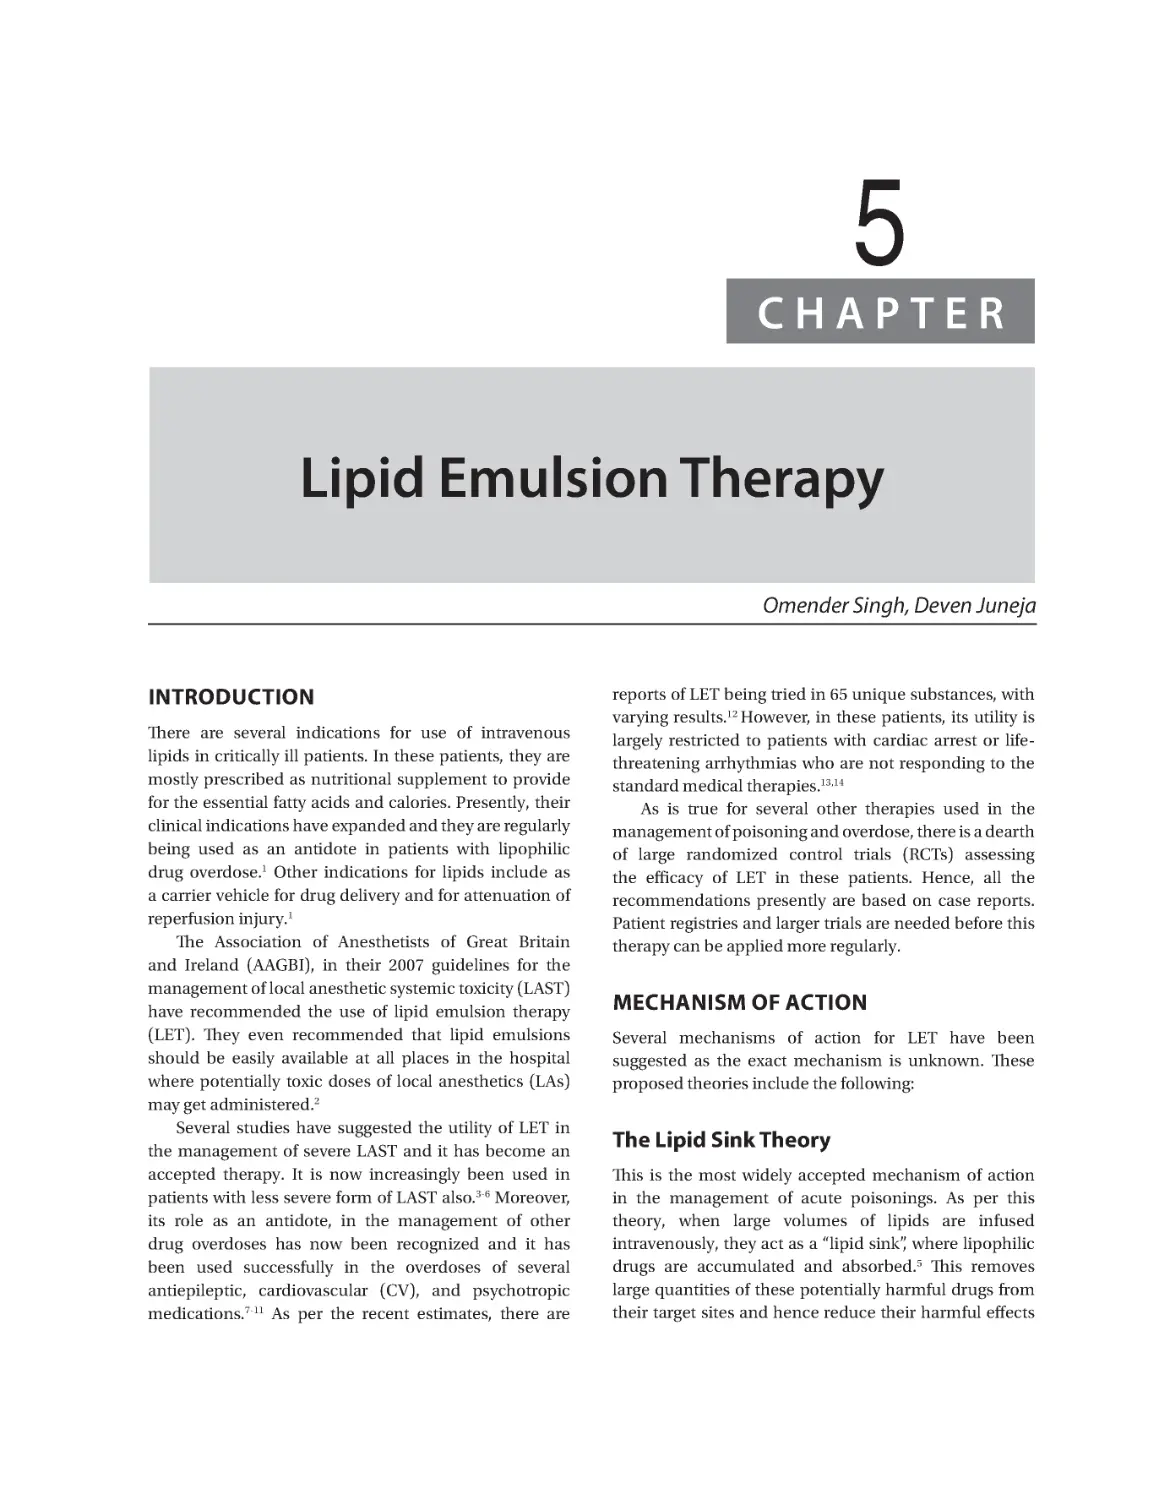 Chapter 5: Lipid Emulsion Therapy